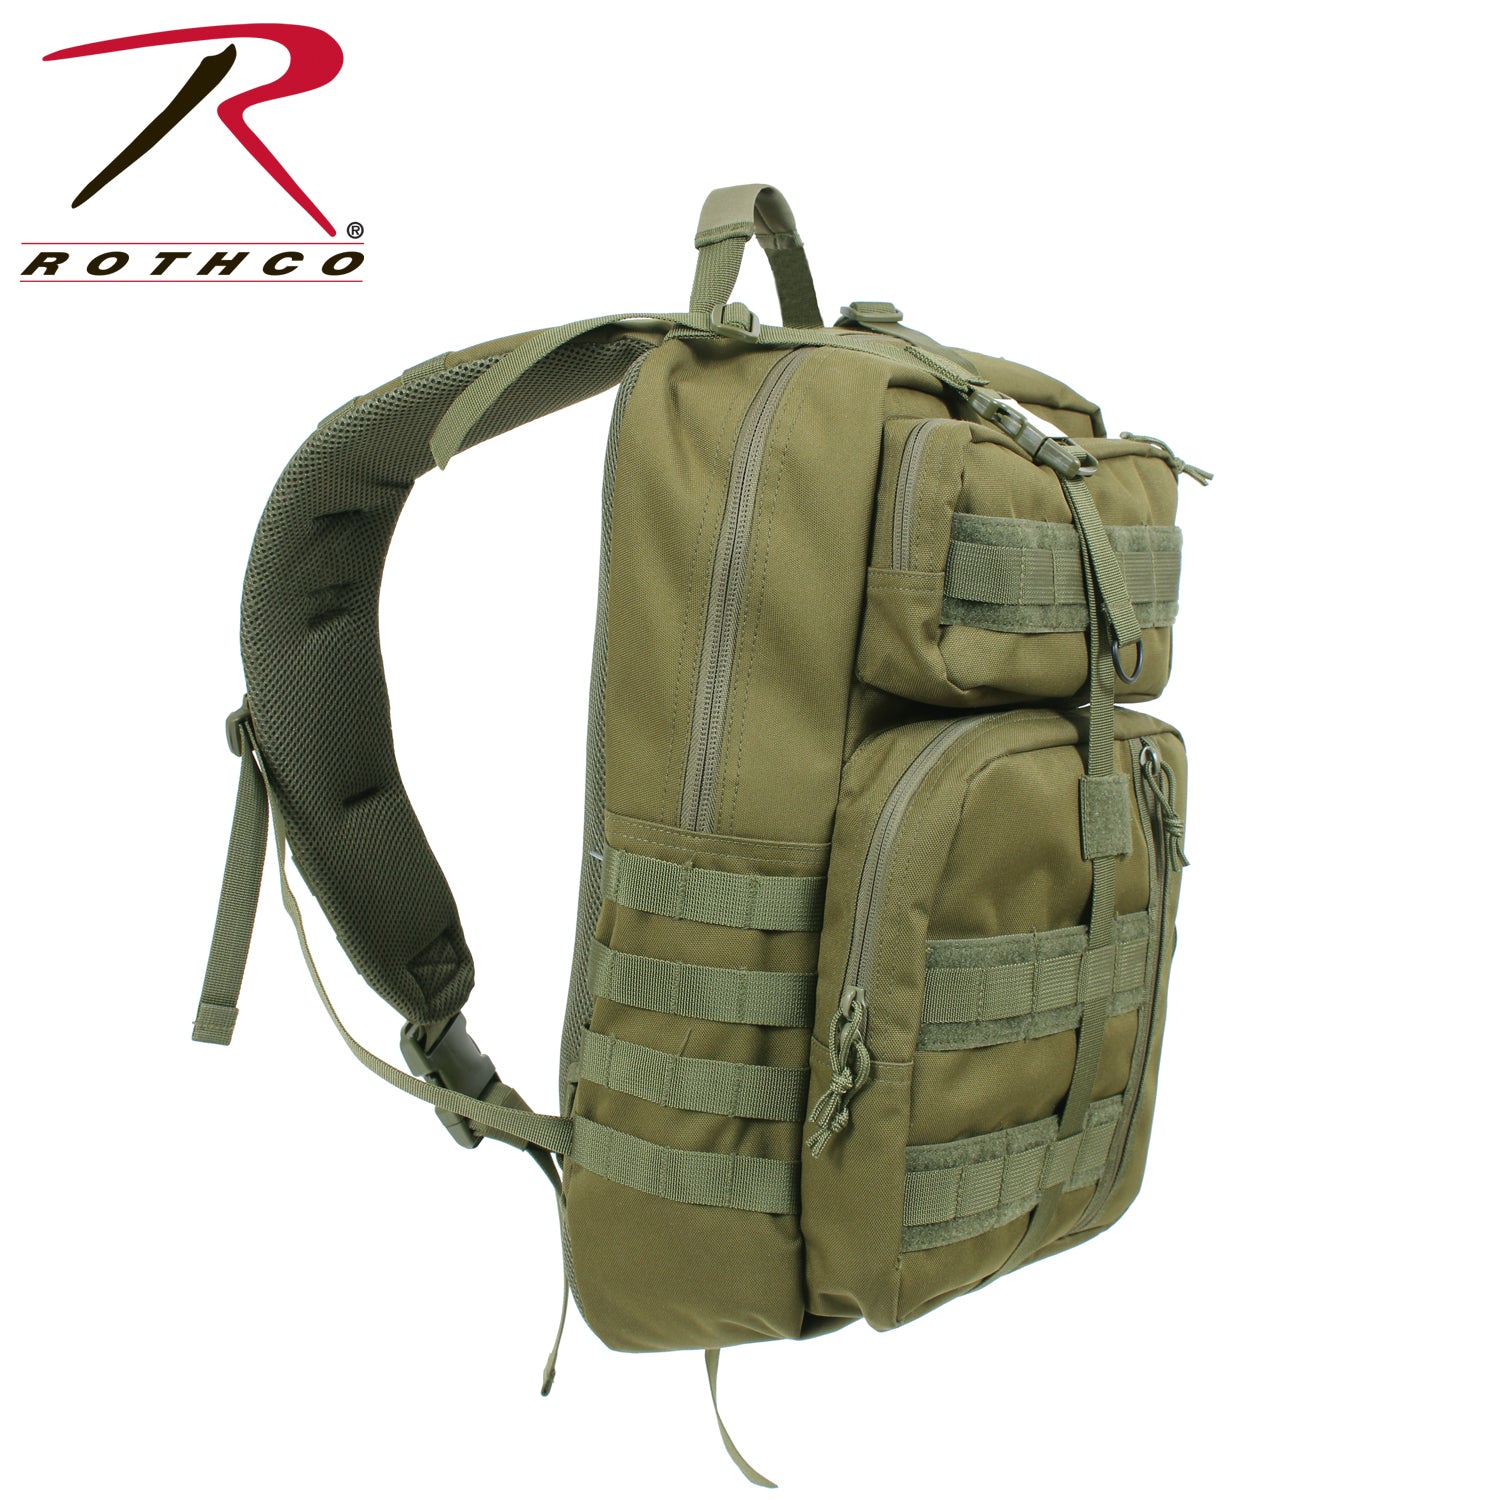 Rothco Tactisling Transport Pack - Olive - Eminent Paintball And Airsoft